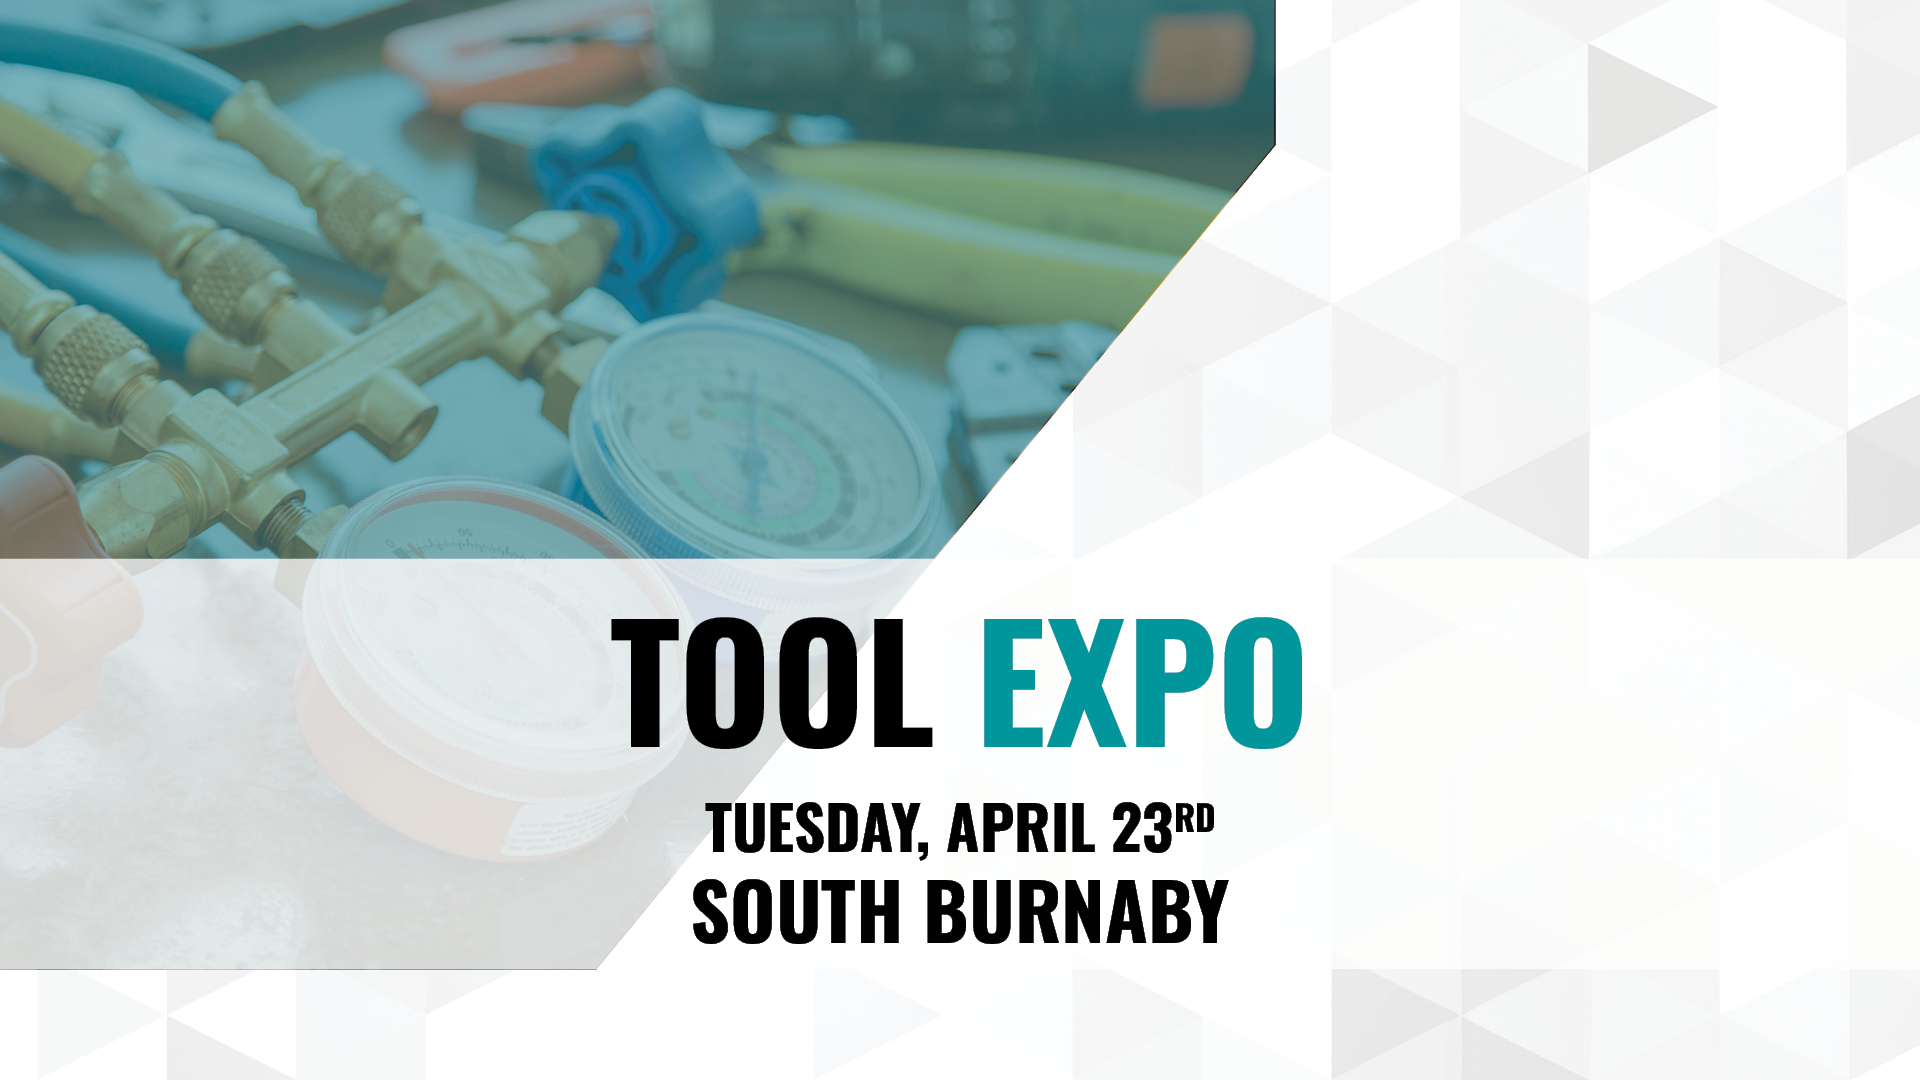 Tool Expo Tradeshow in South Burnaby